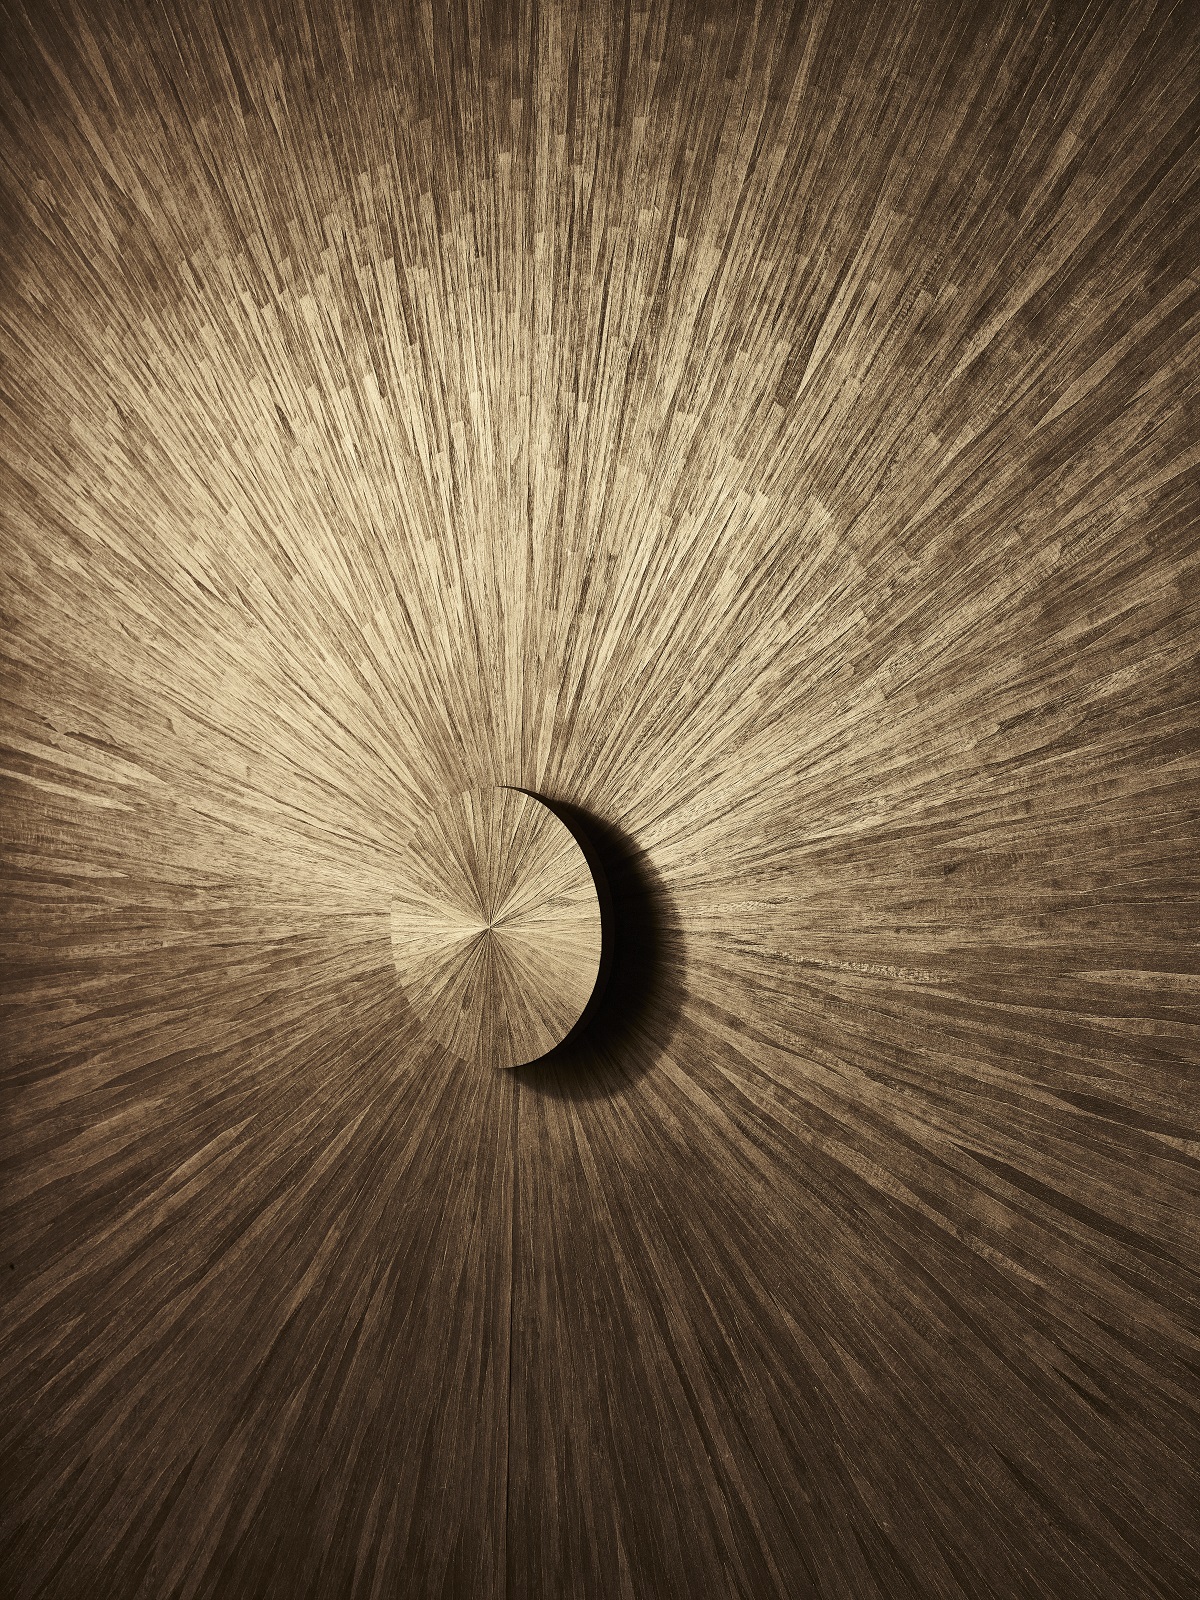 detail of Starburst wooden veneer handmade wall covering from the studio of Fameed Khalique